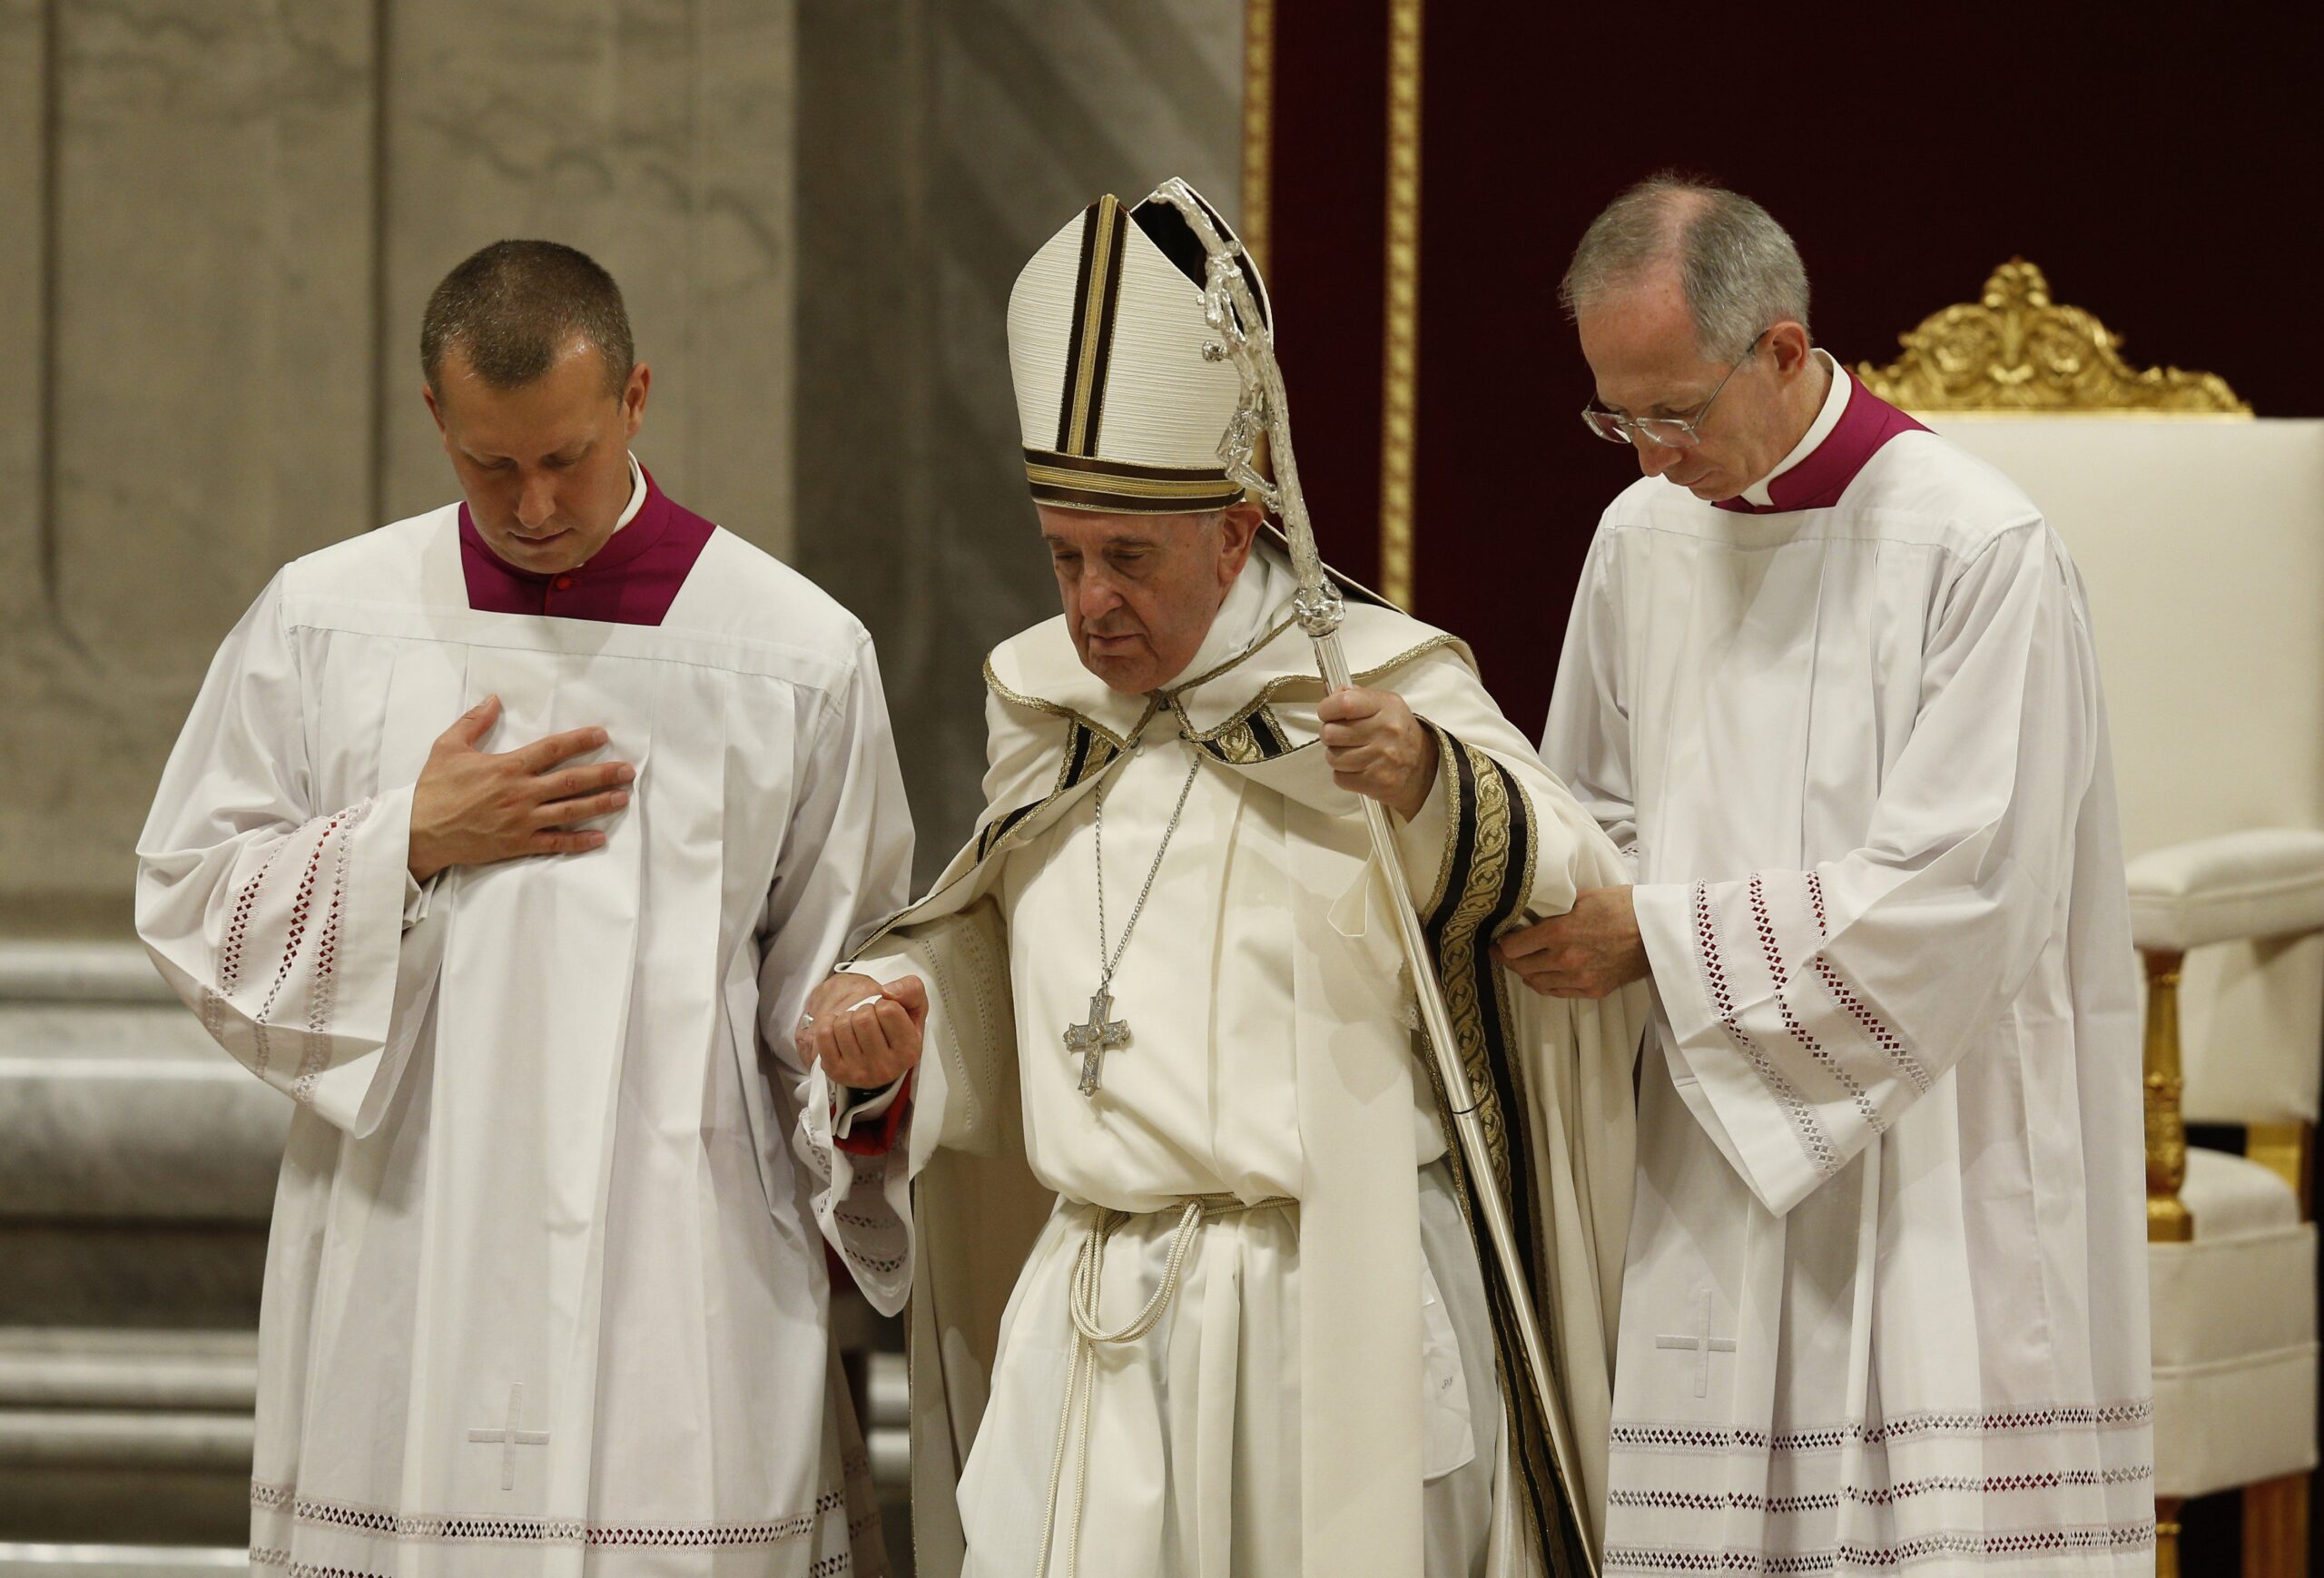 Pope absent from liturgy, submits remarks urging to find meaning in pandemic - The Dialog